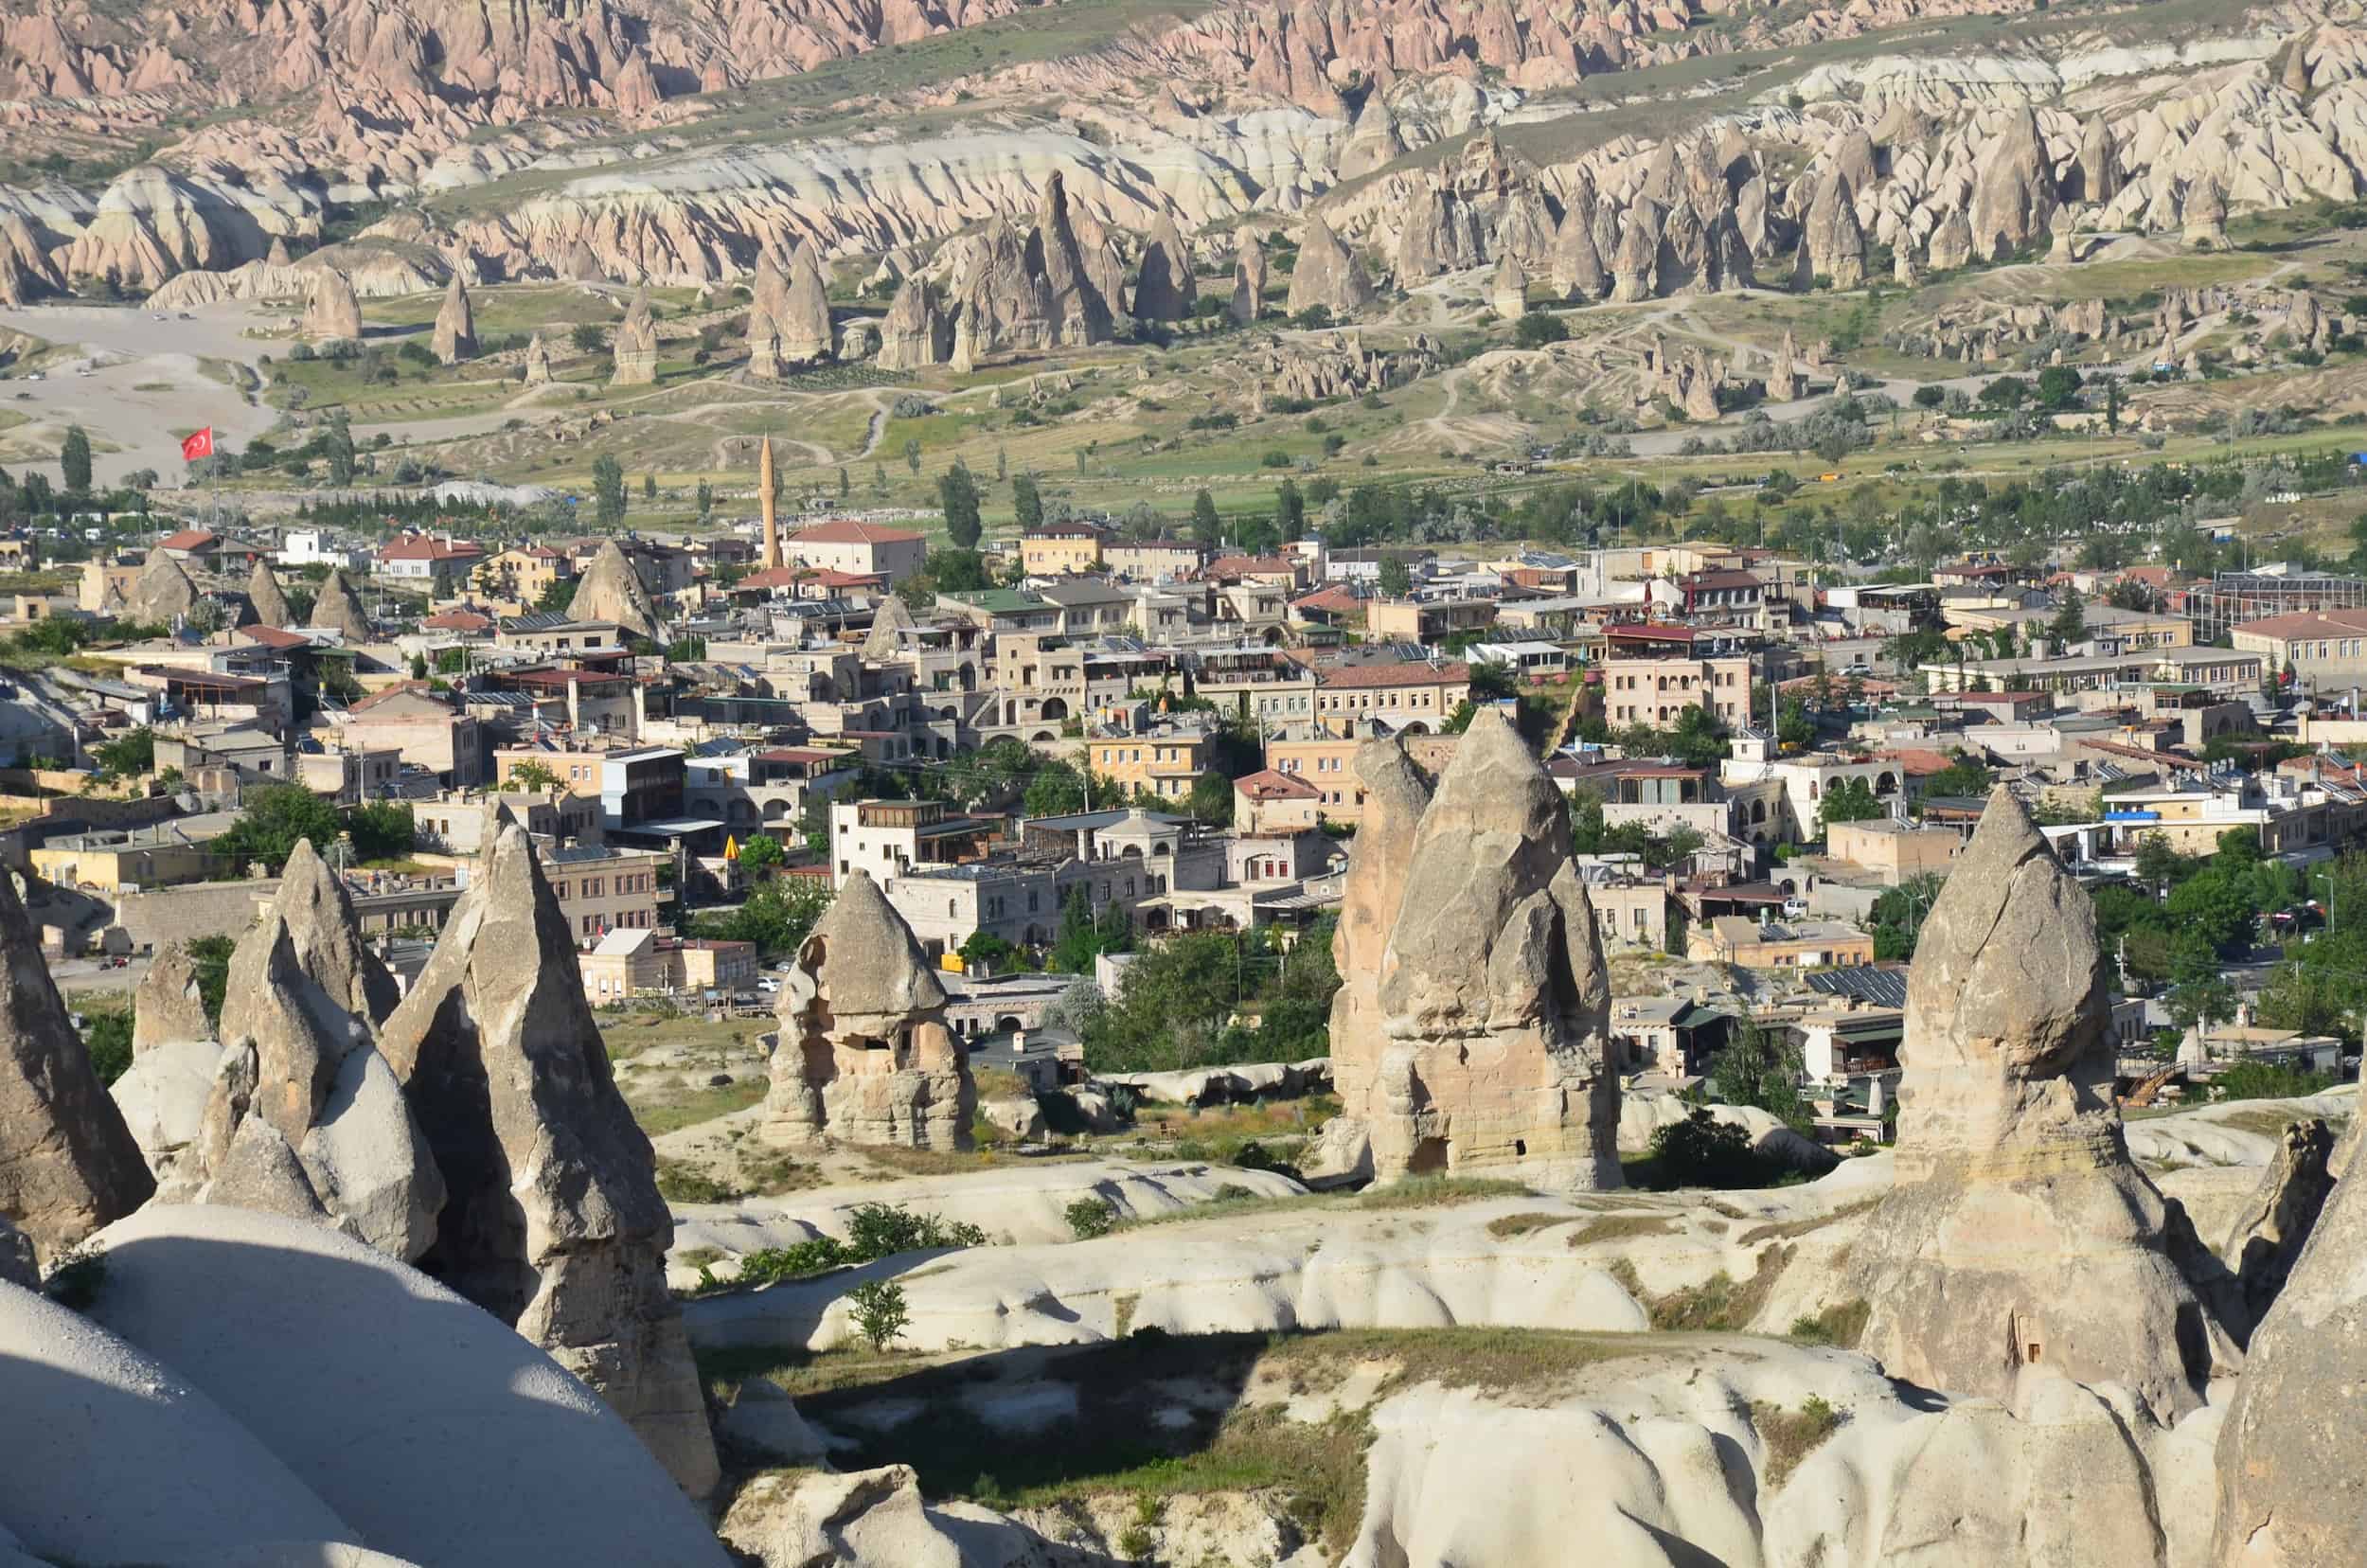 Göreme with fairy chimneys in the foreground